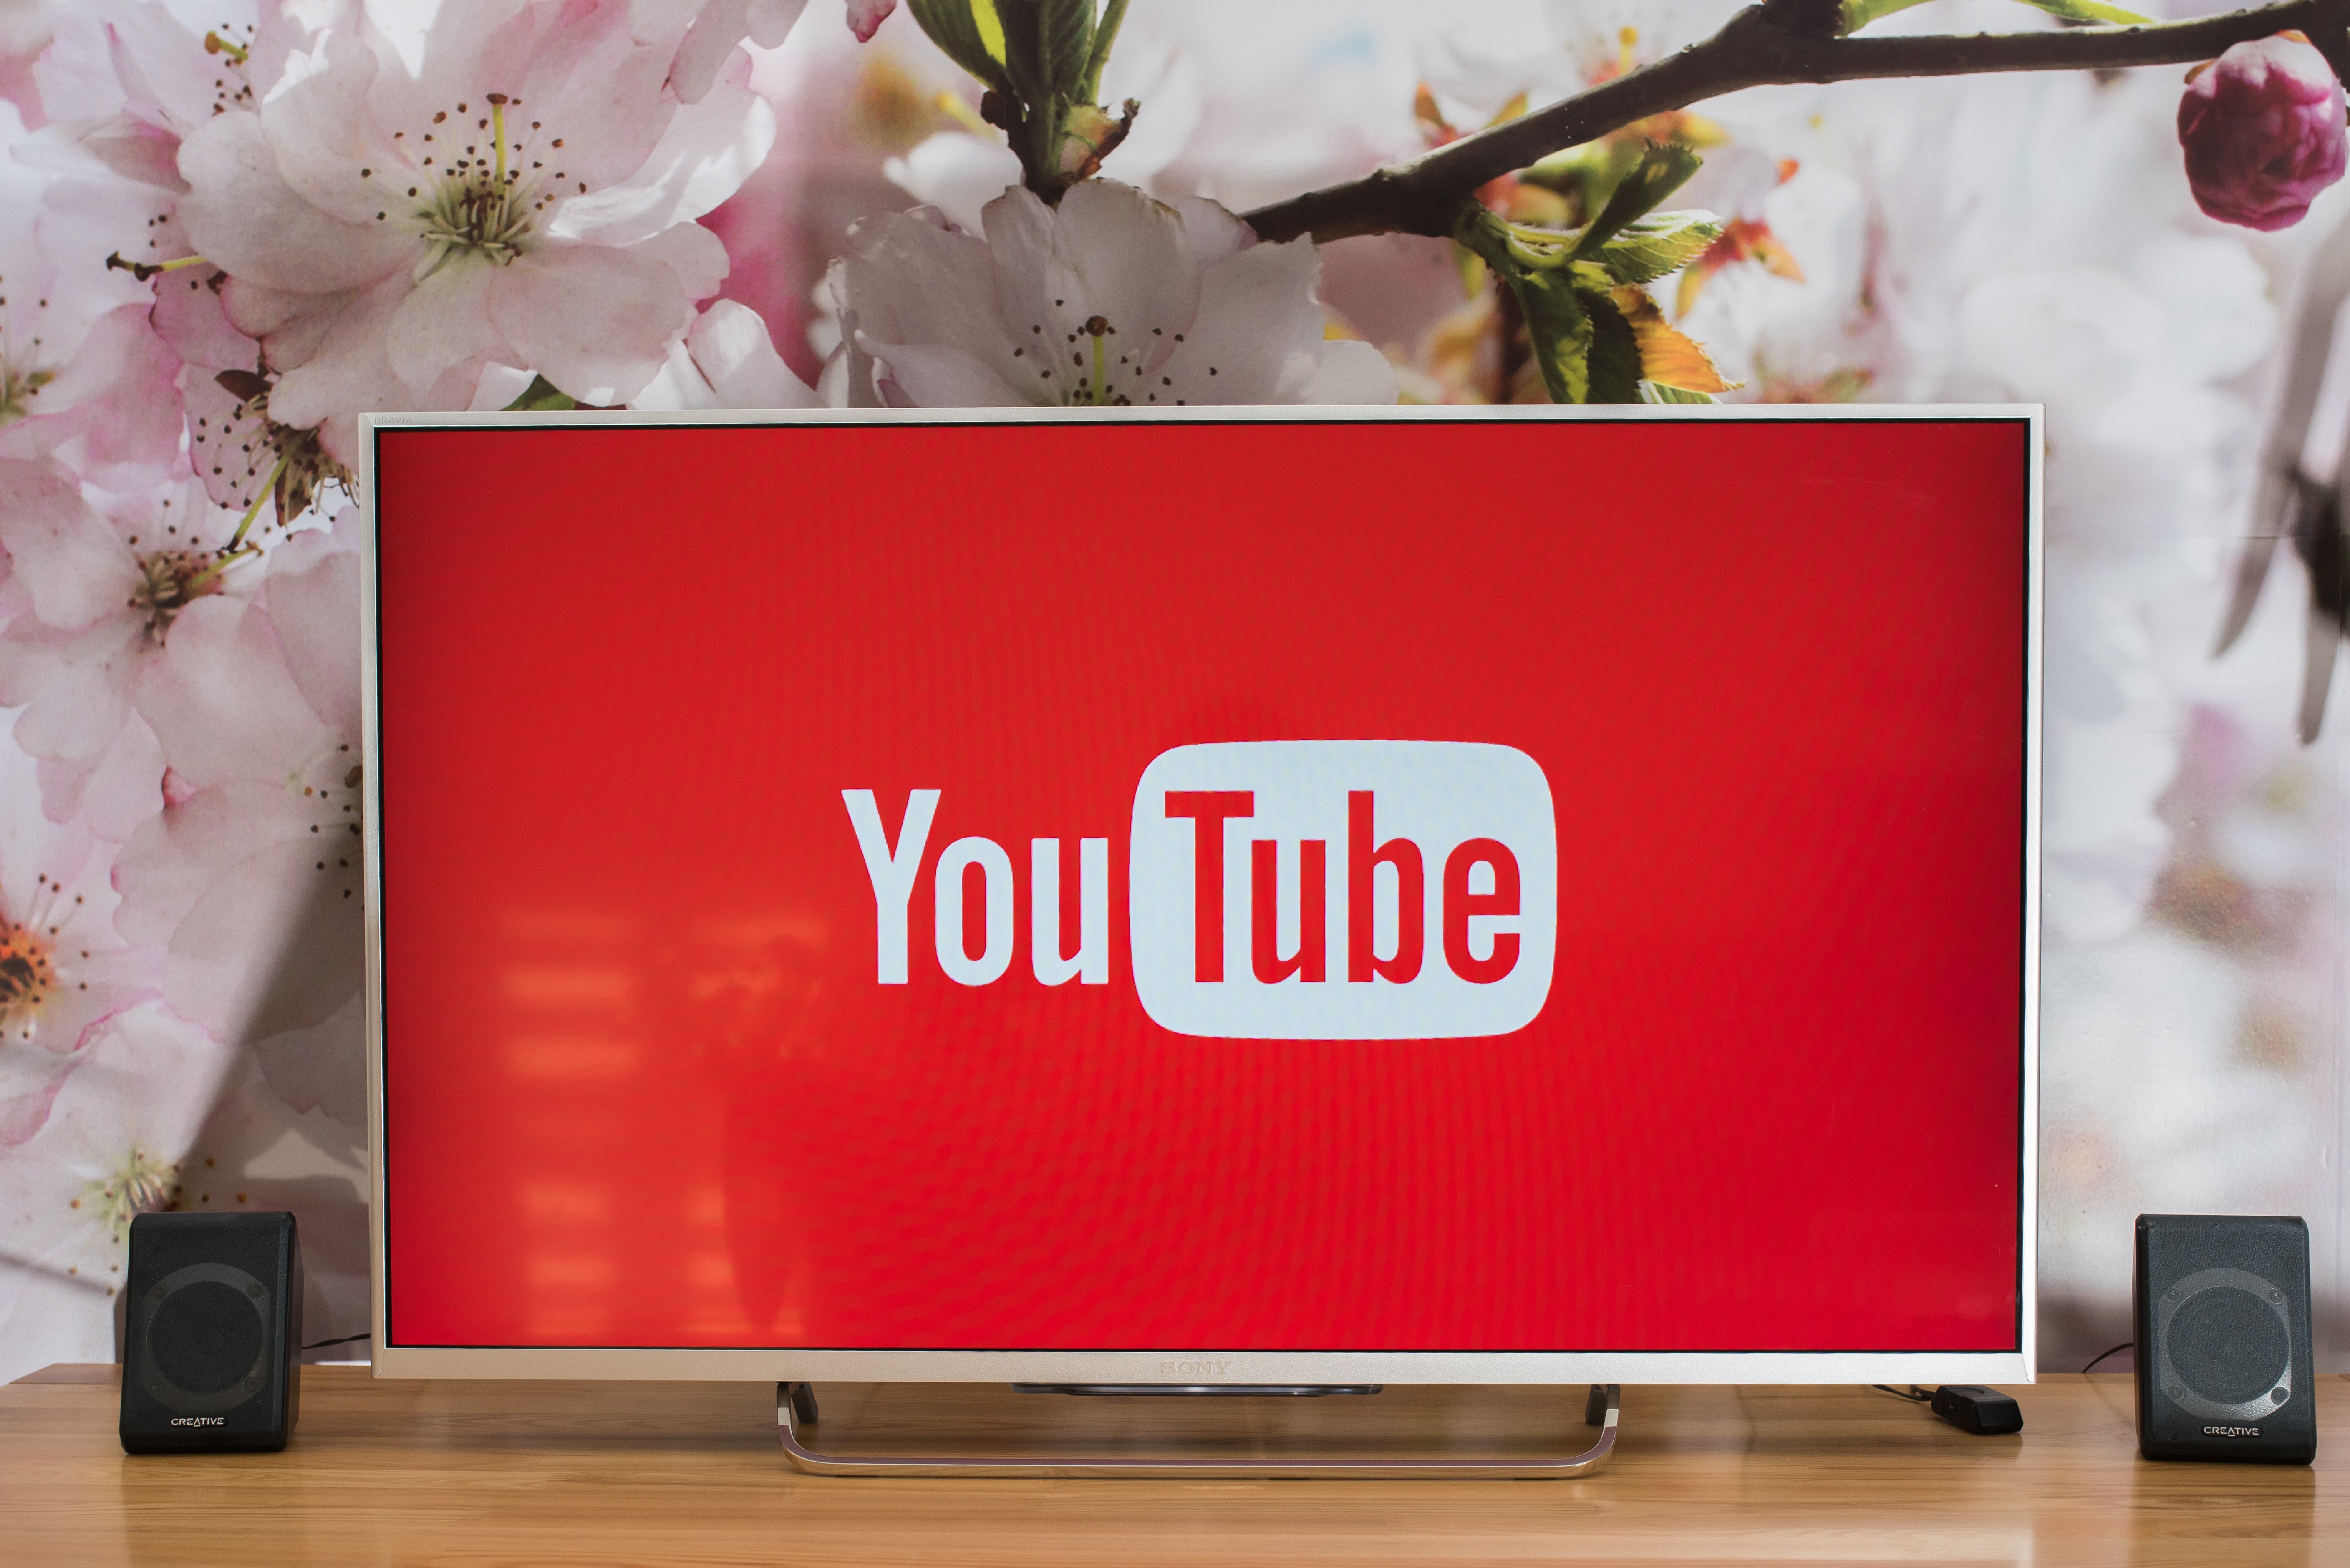 YouTube is Offering More Free Movies and TV Show